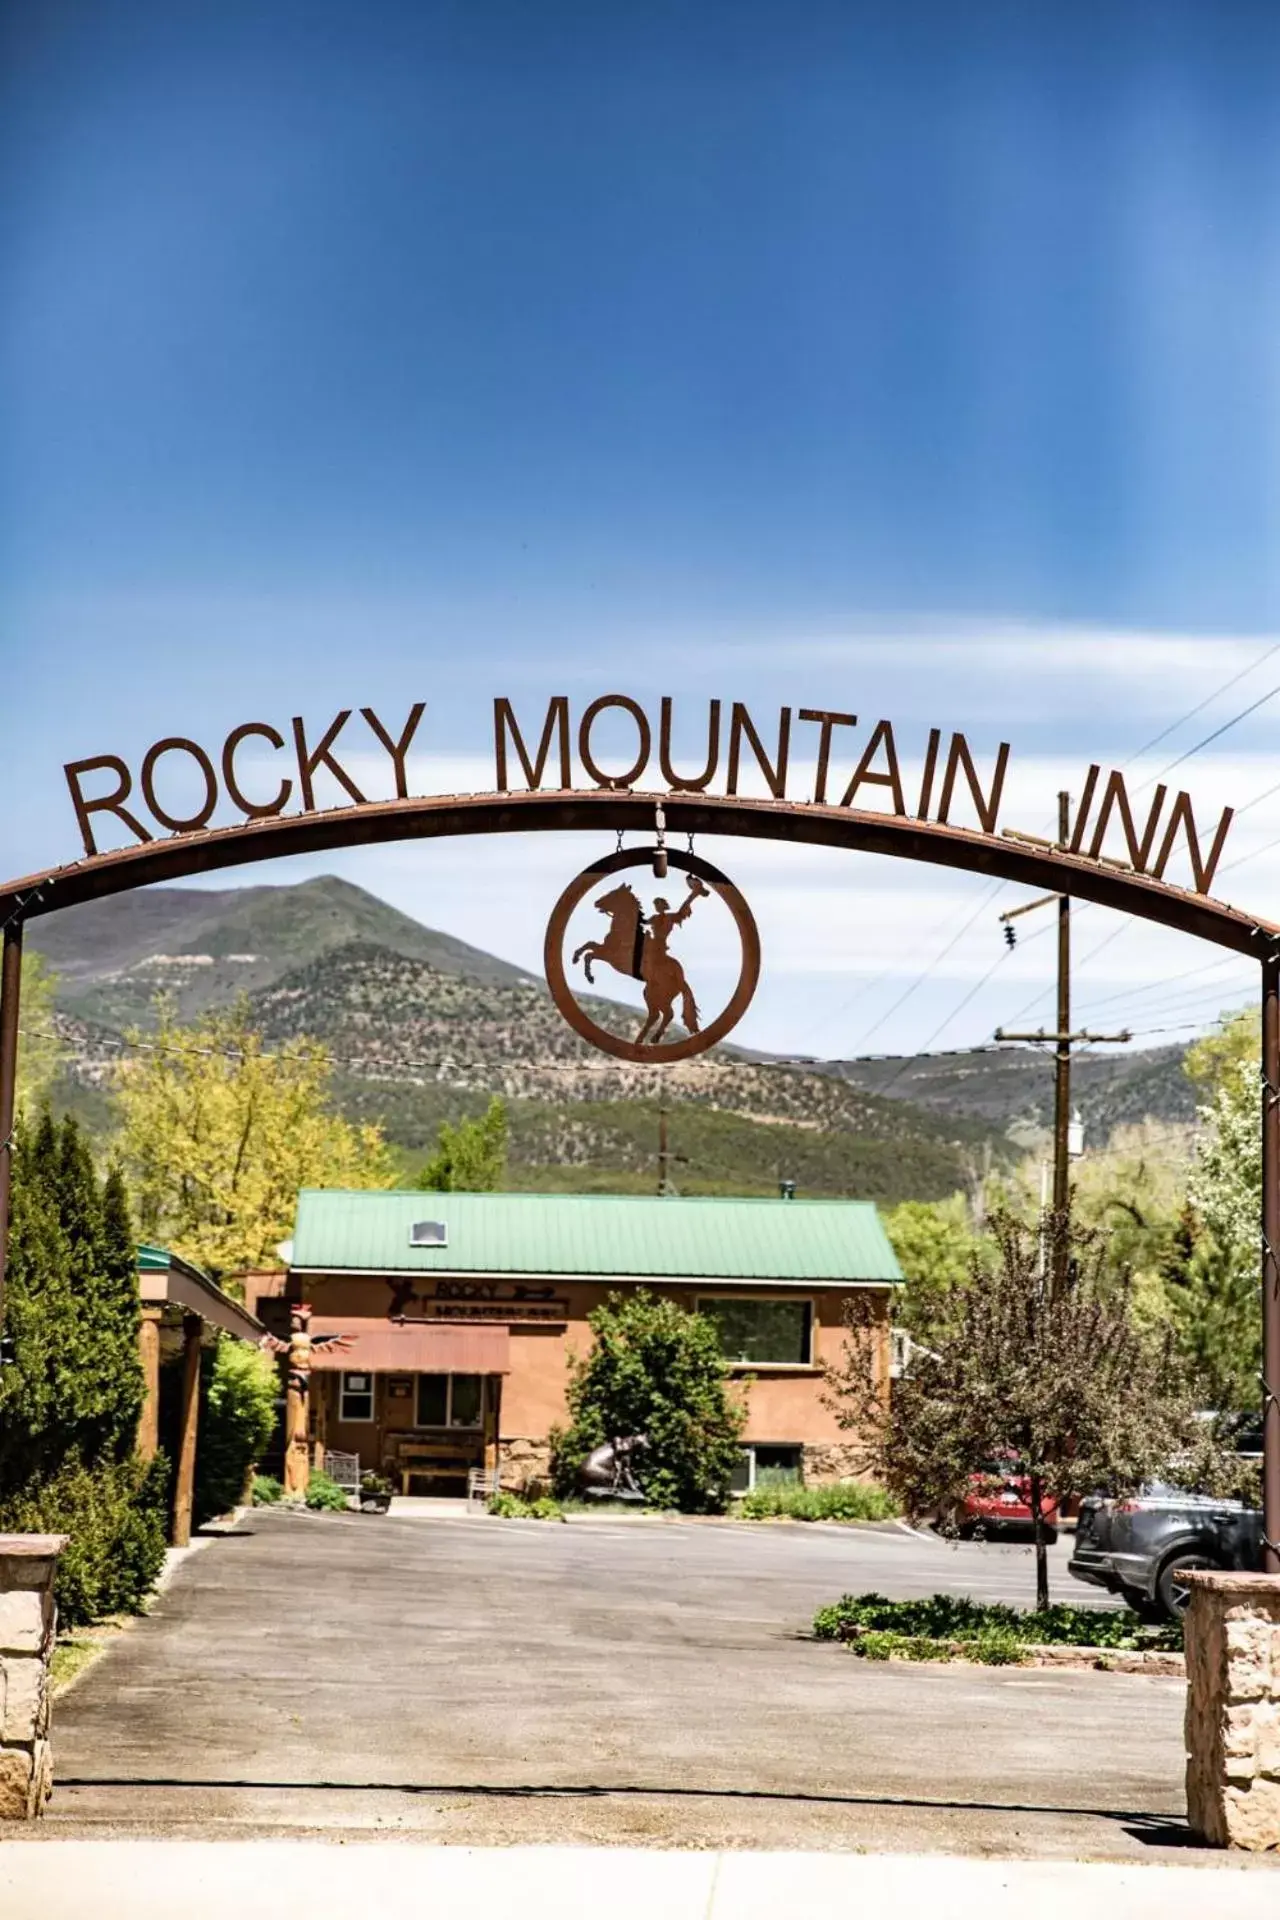 Property logo or sign in Rocky Mountain Inn